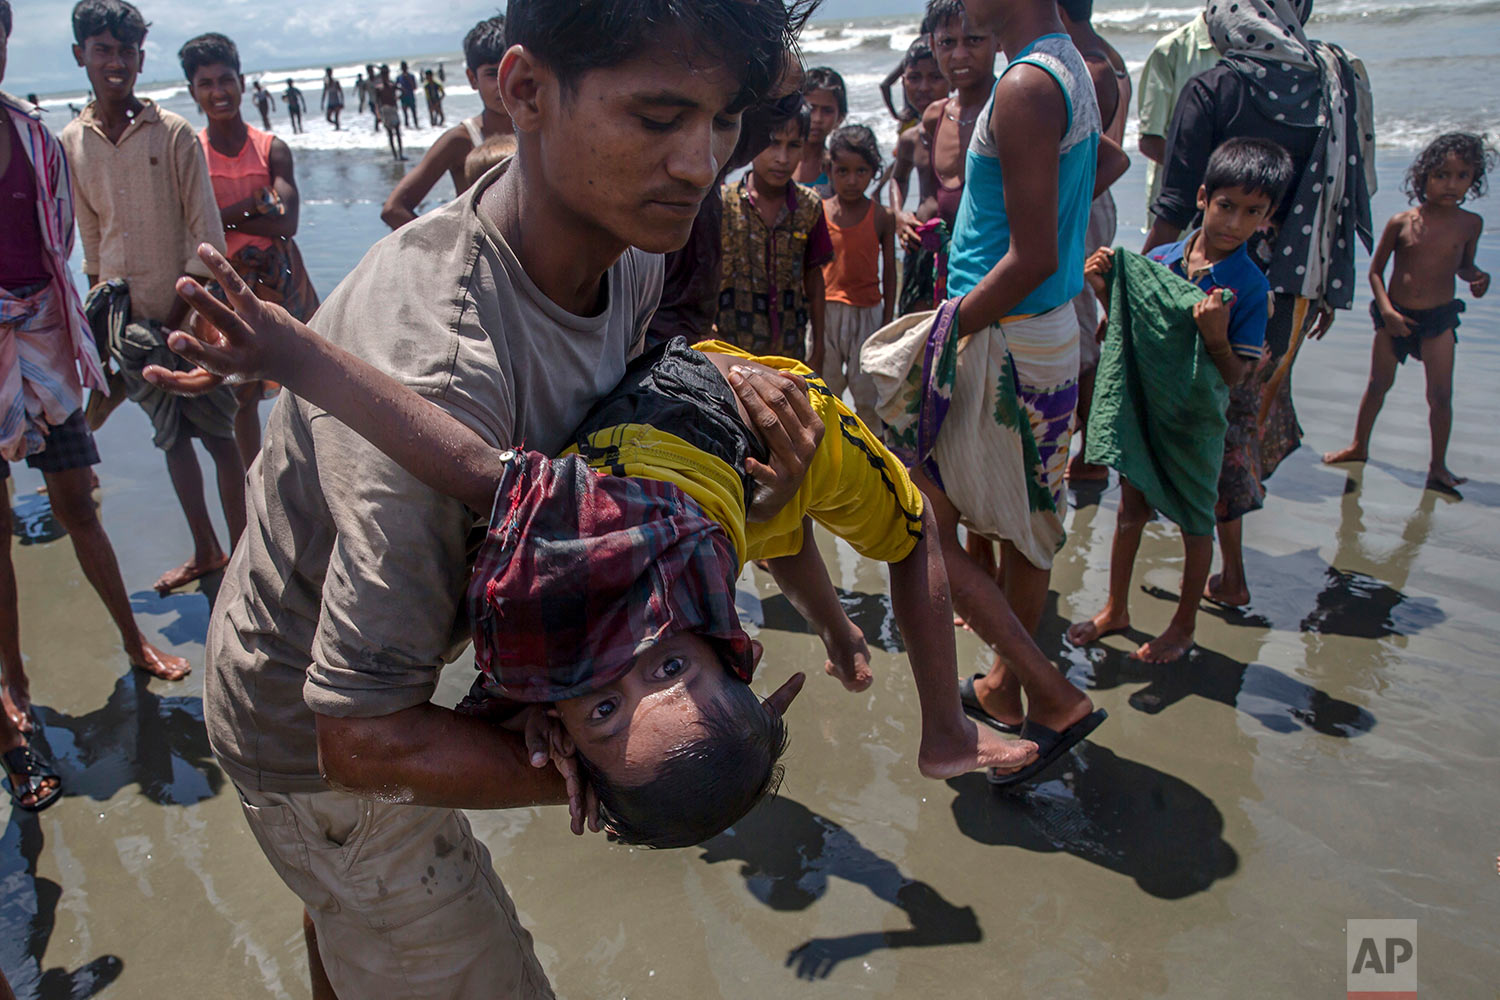 A man shakes a Rohingya Muslim boy while trying to revive him after the boat he was traveling in capsized just before reaching shore at Shah Porir Dwip, Bangladesh, Thursday, Sept. 14, 2017. (AP Photo/Dar Yasin)